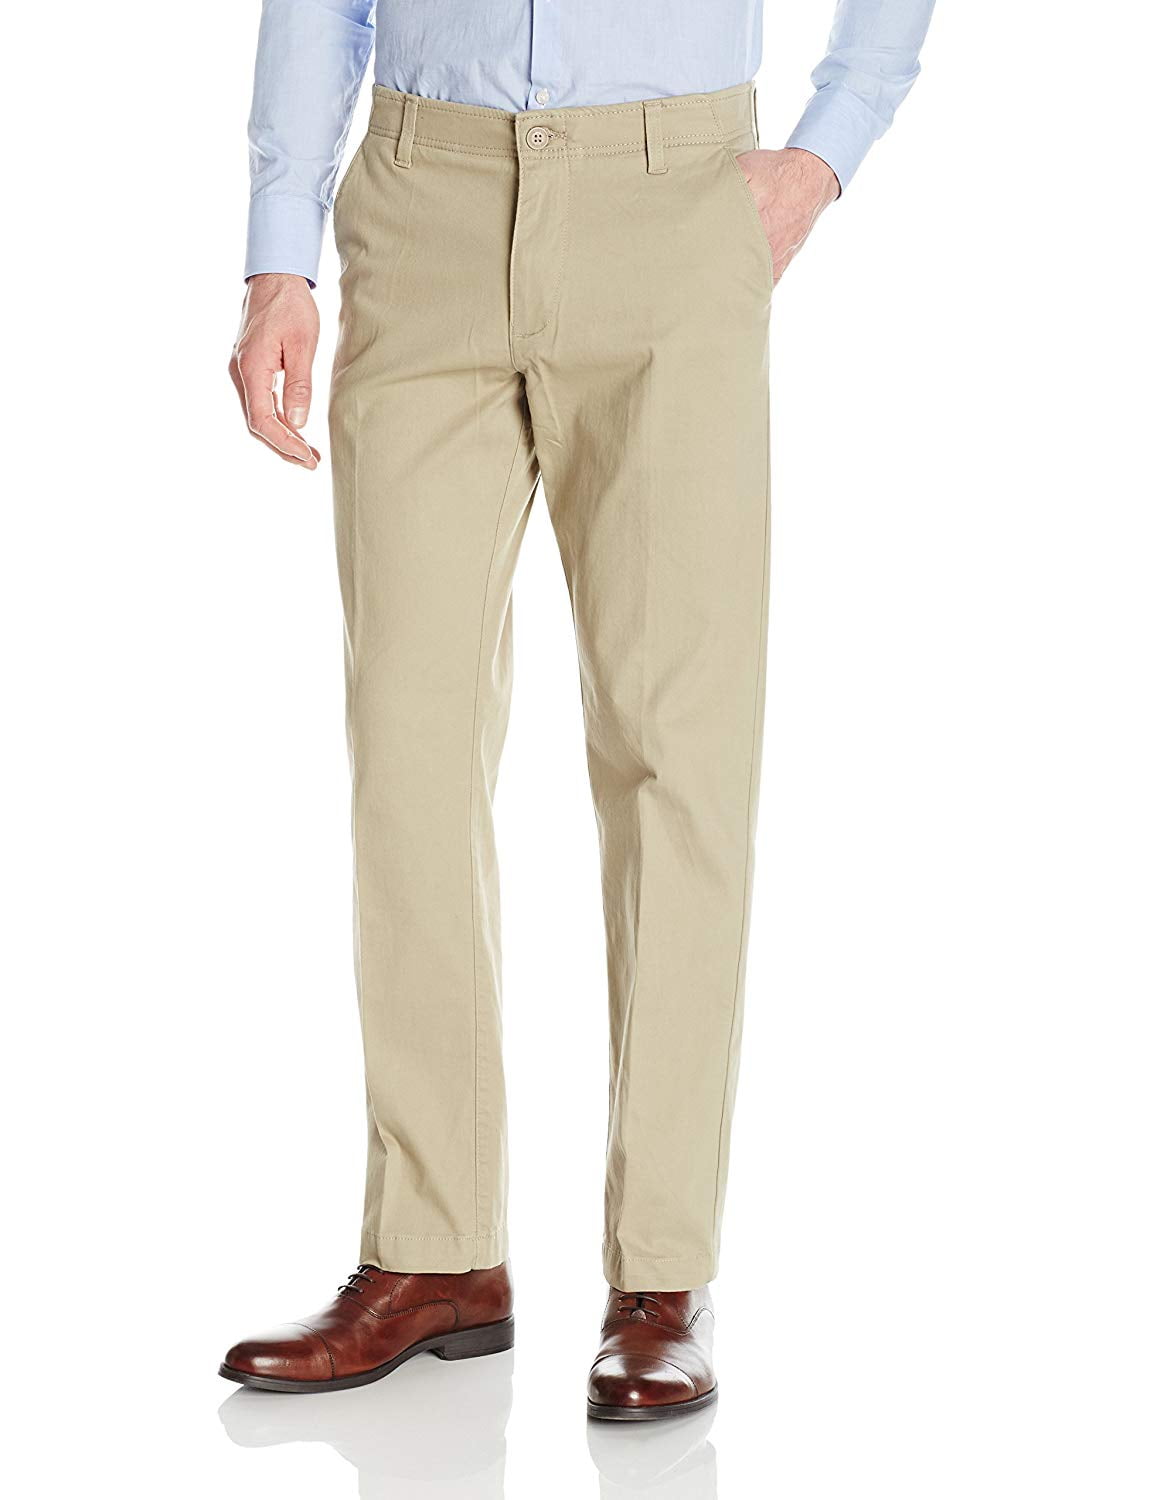 Lee Men's Weekend Chino Straight Fit Flat Front Casual Pants Pick Size/Color 